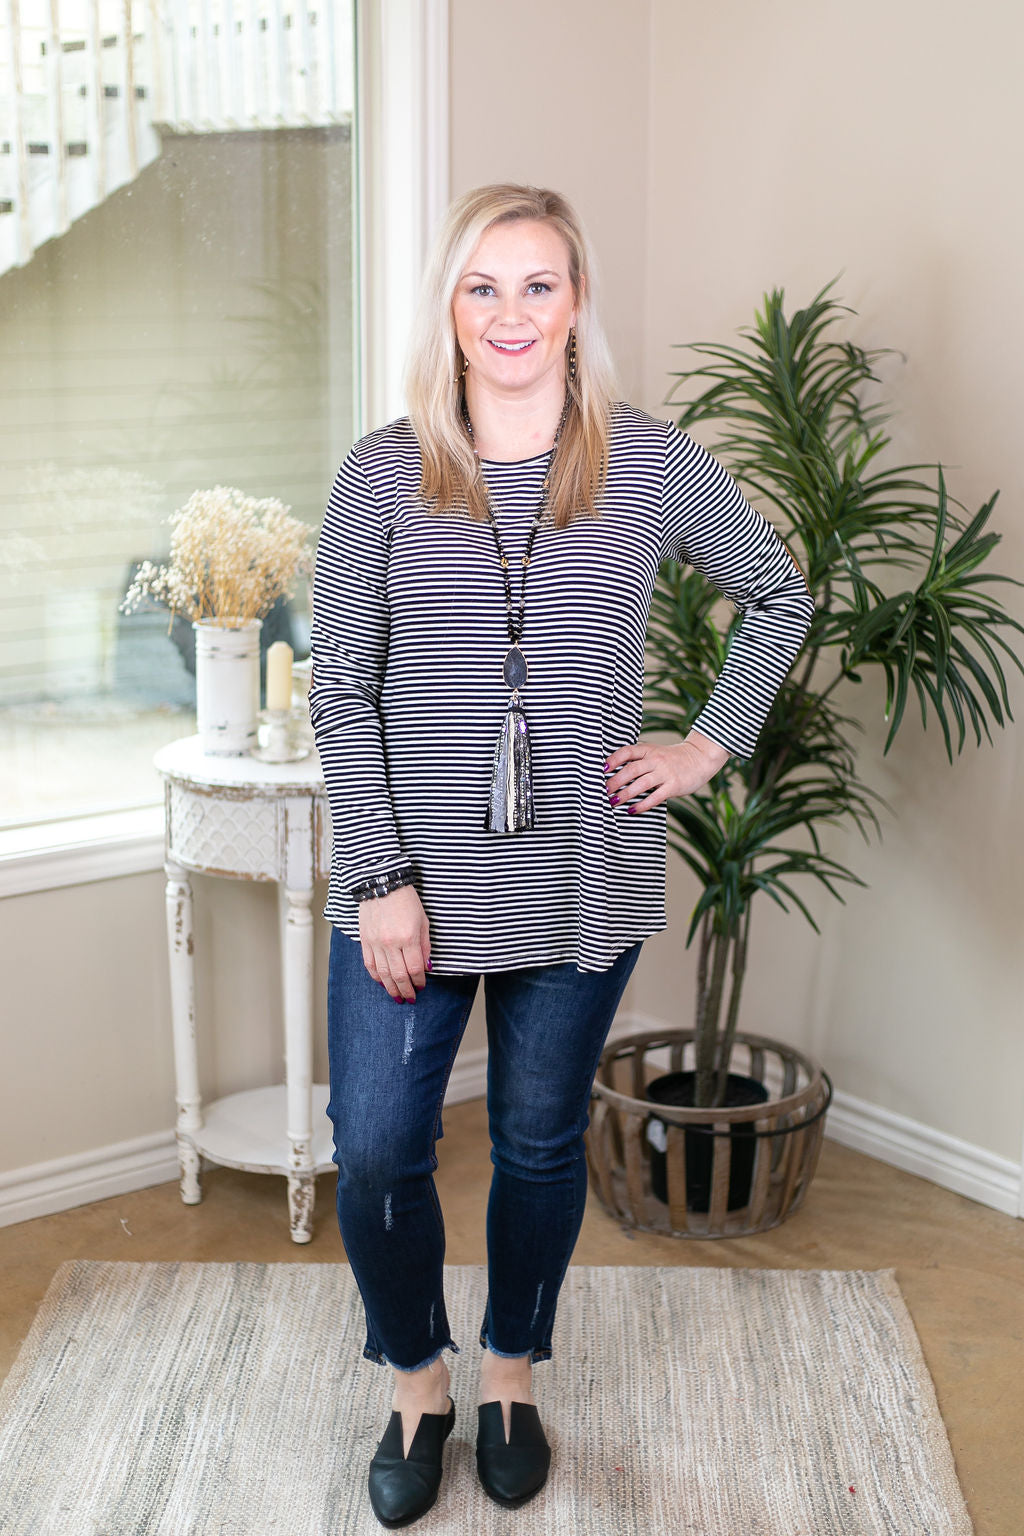 A Different Day Long Sleeve Striped Top with Suede Elbow Patches in Black and White - Giddy Up Glamour Boutique